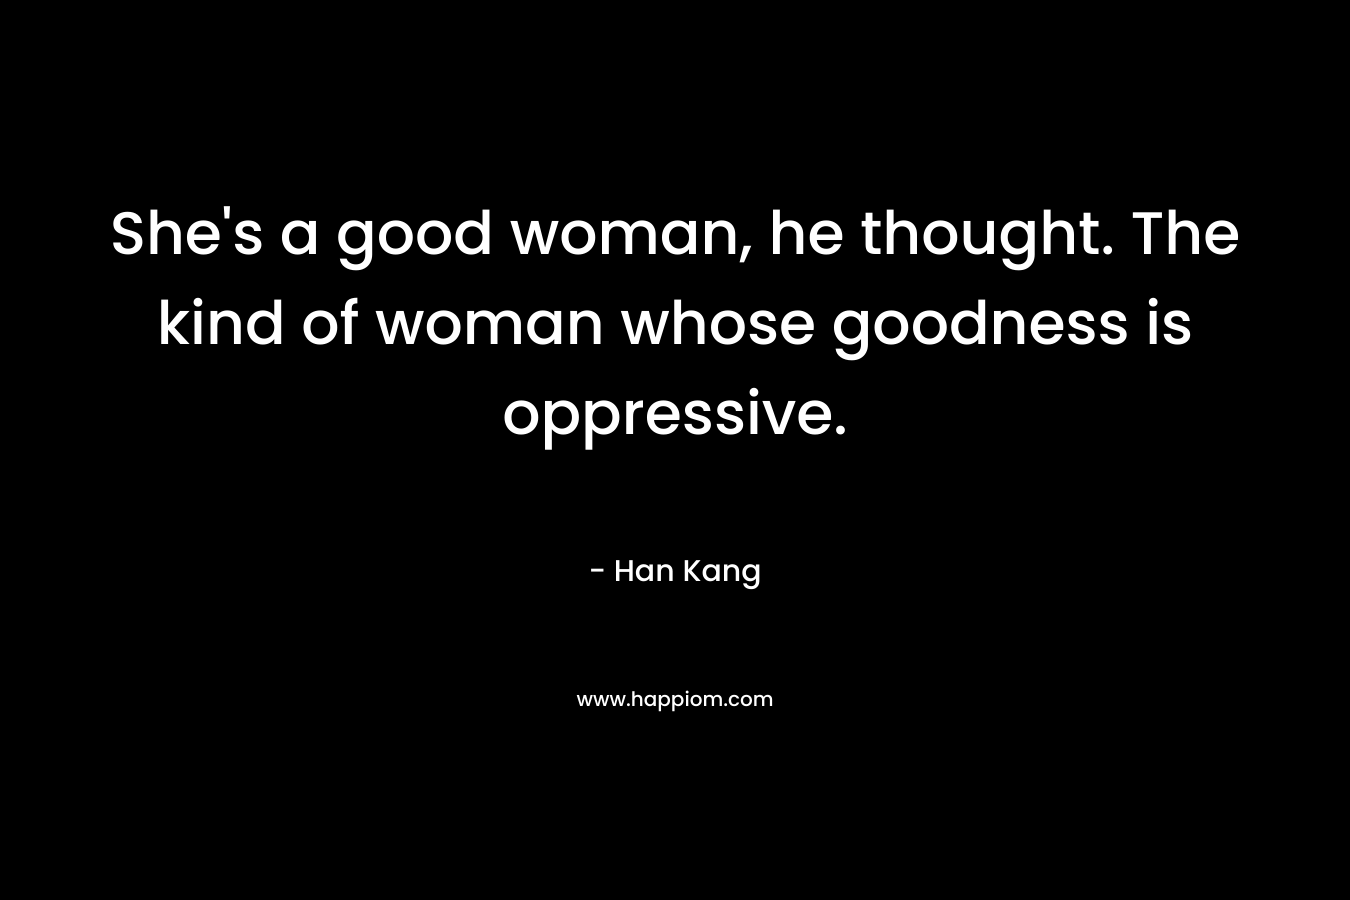 She’s a good woman, he thought. The kind of woman whose goodness is oppressive. – Han Kang